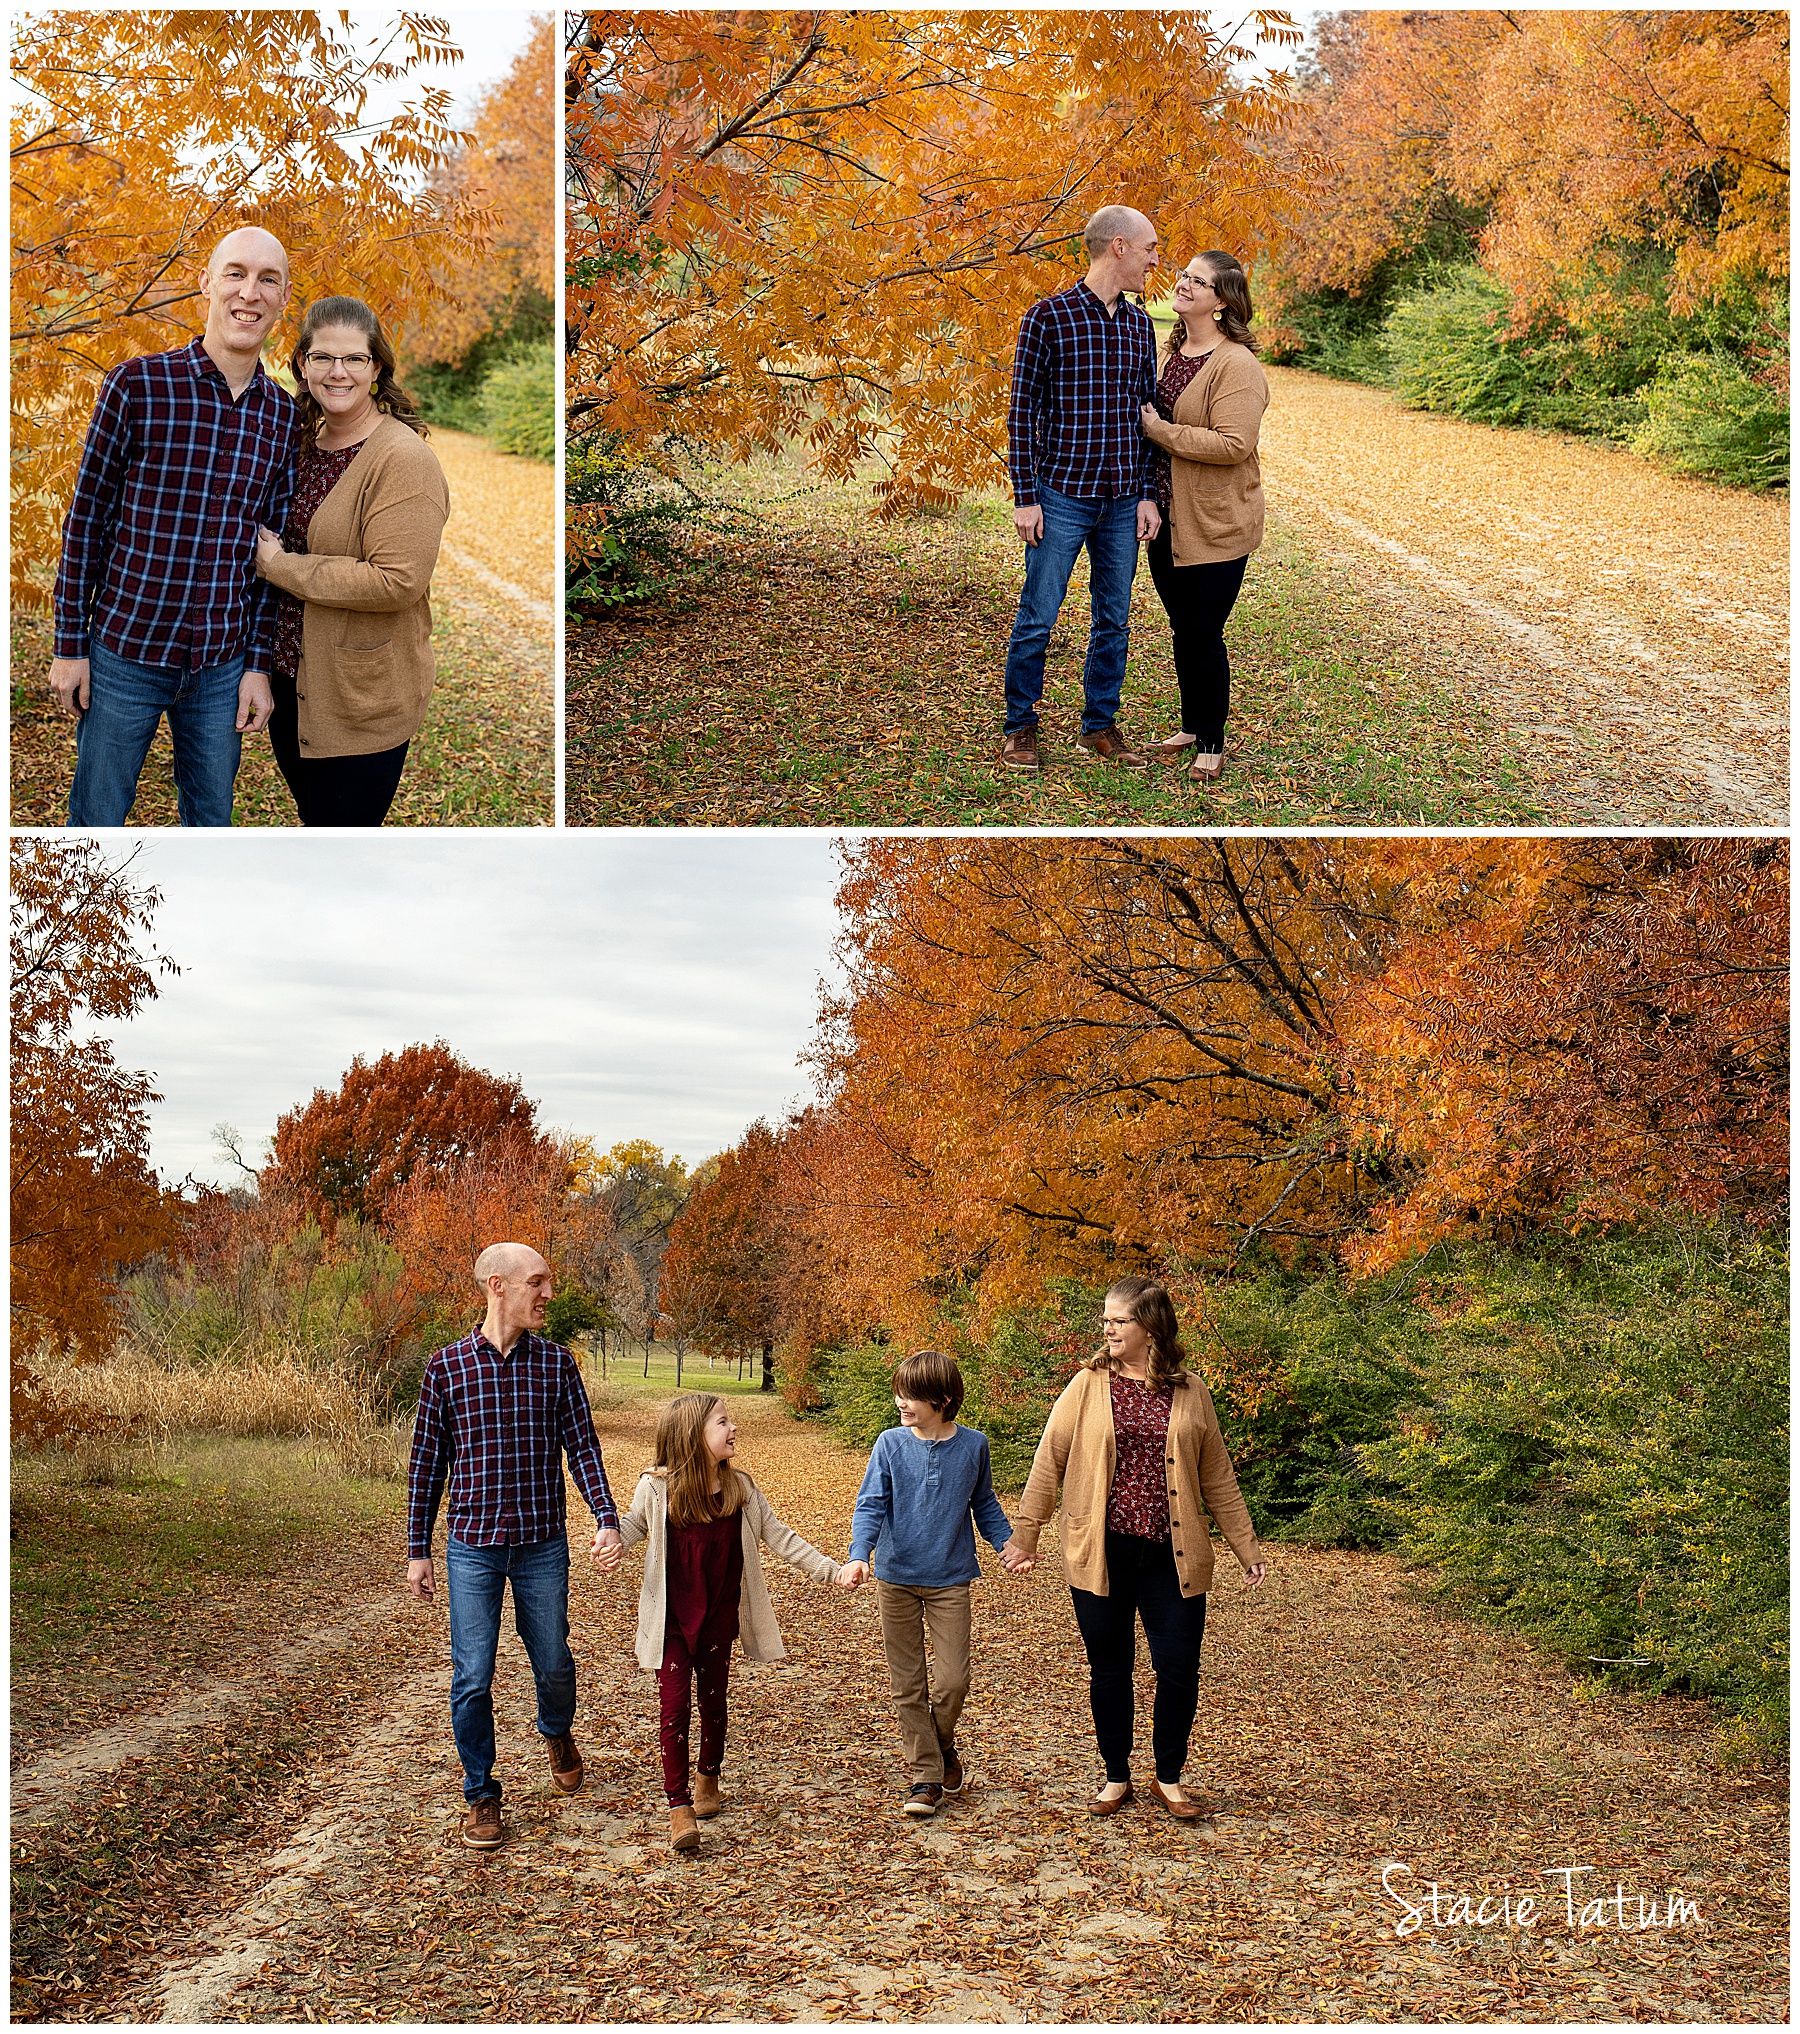 Dallas Family Fall Photos with Mom Dad and kids walking through trees and leaves.jpg